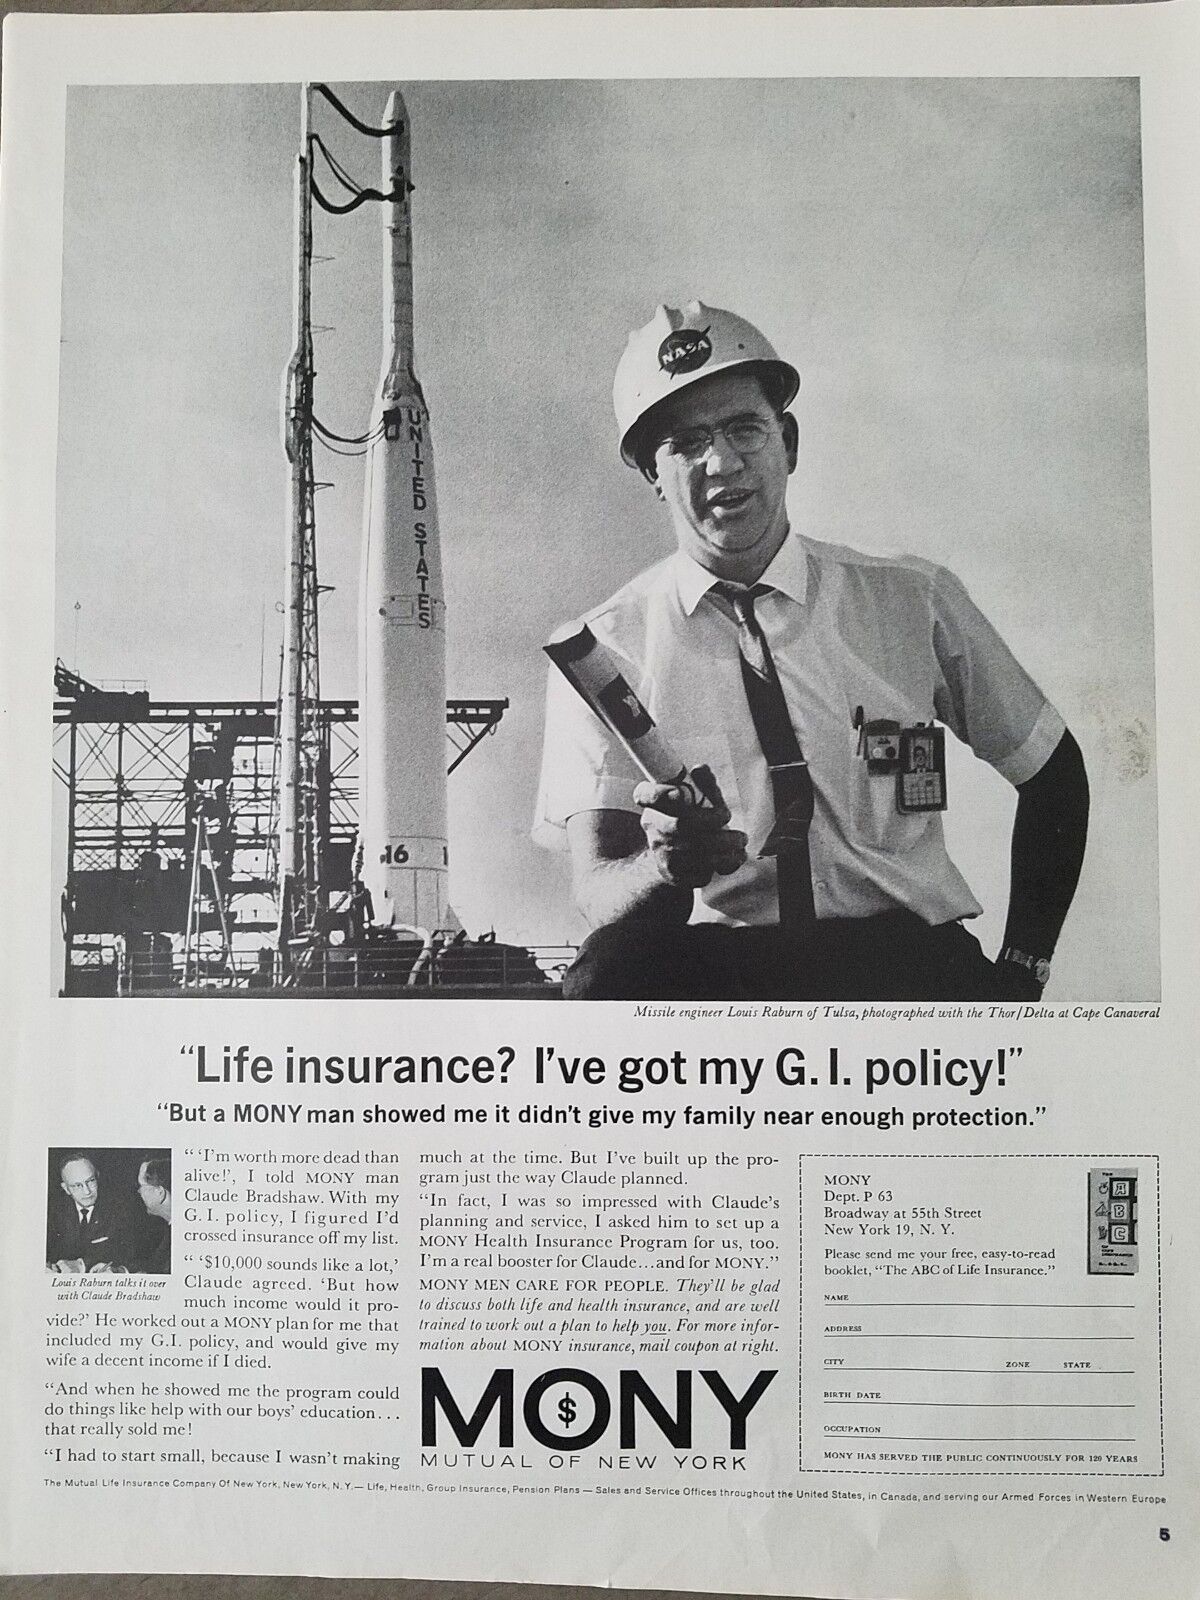 1963 Mony Mutual life insurance missile engineer Delta Cape Canaveral ad